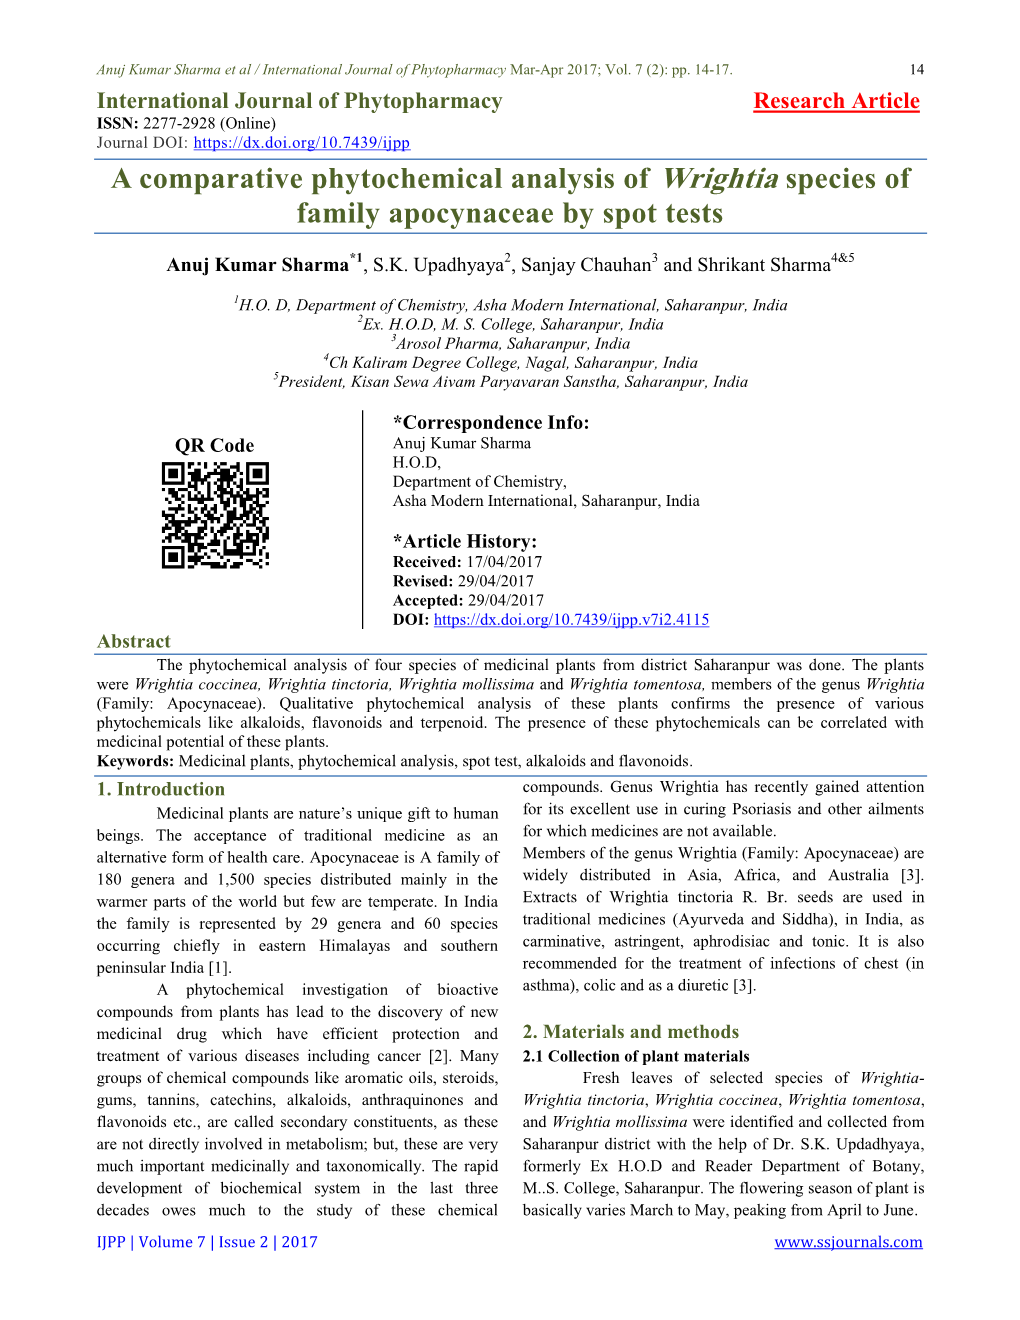 A Comparative Phytochemical Analysis of Wrightia Species of Family Apocynaceae by Spot Tests